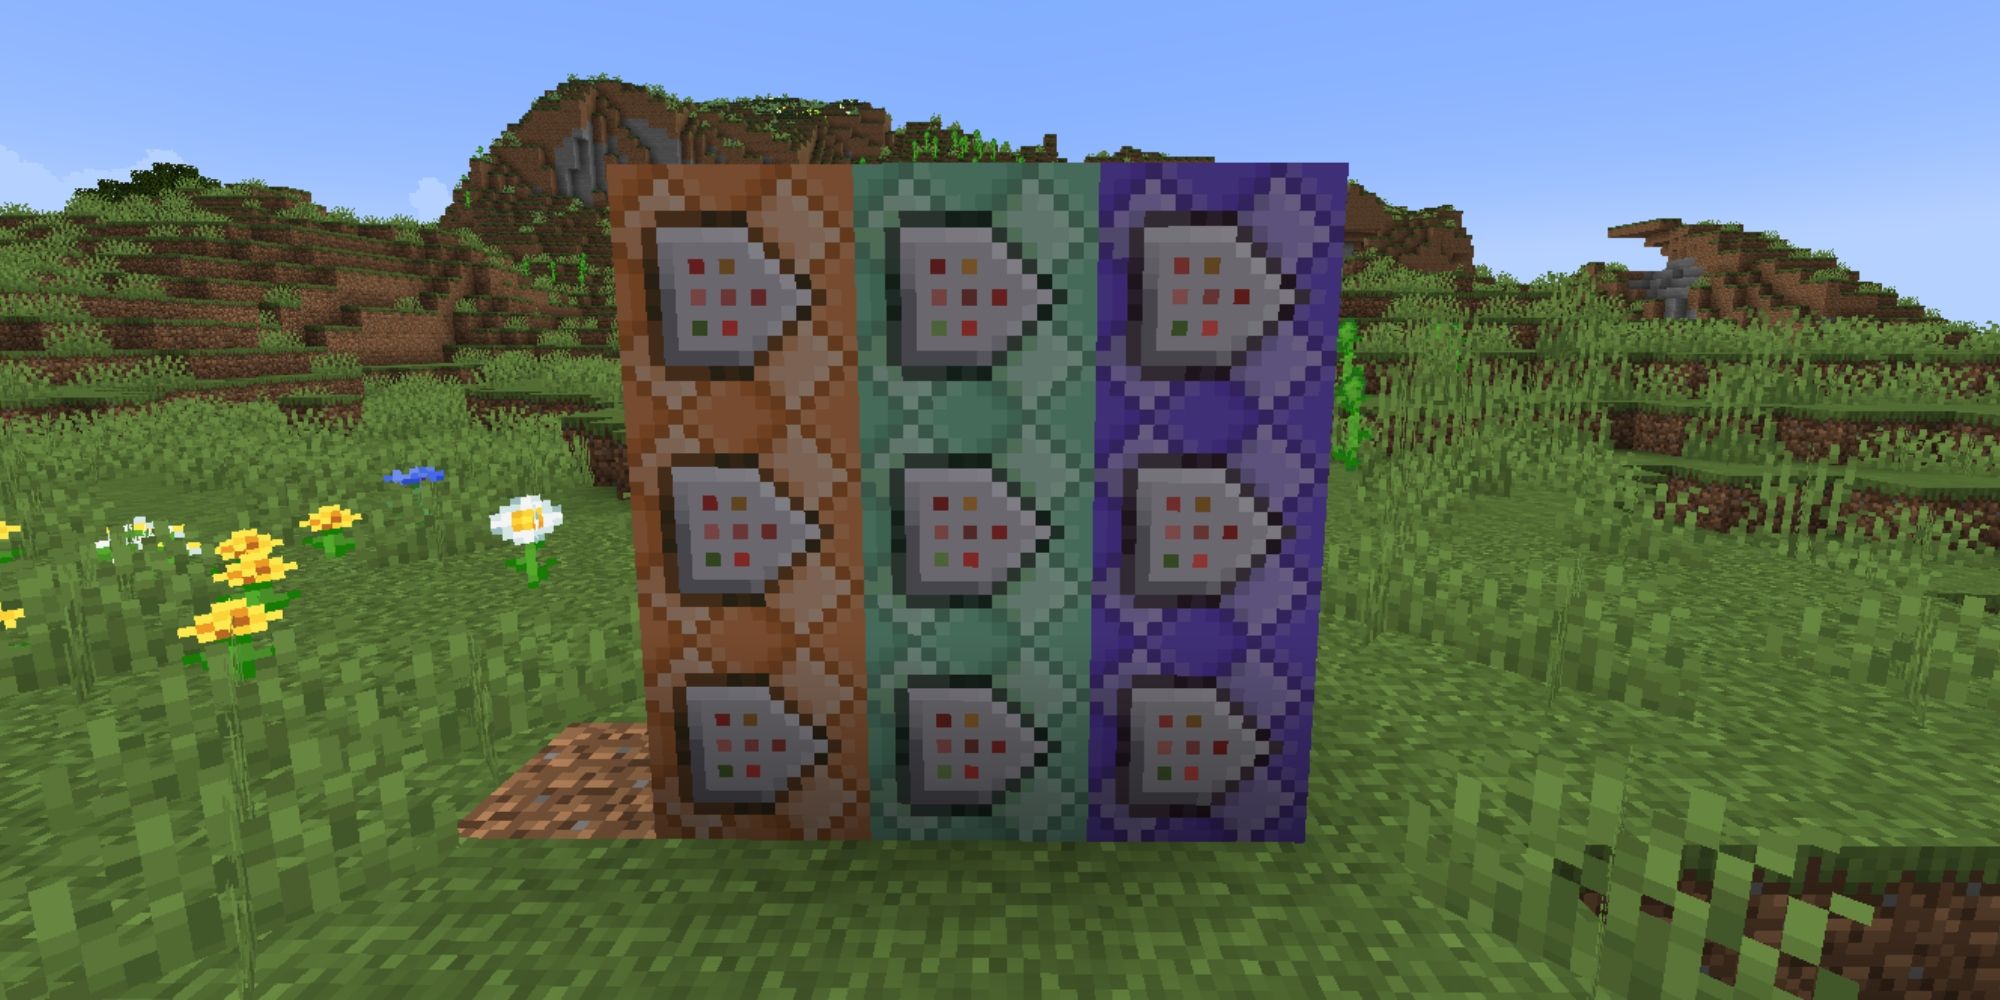 Minecraft Command Blocks in a plains biome